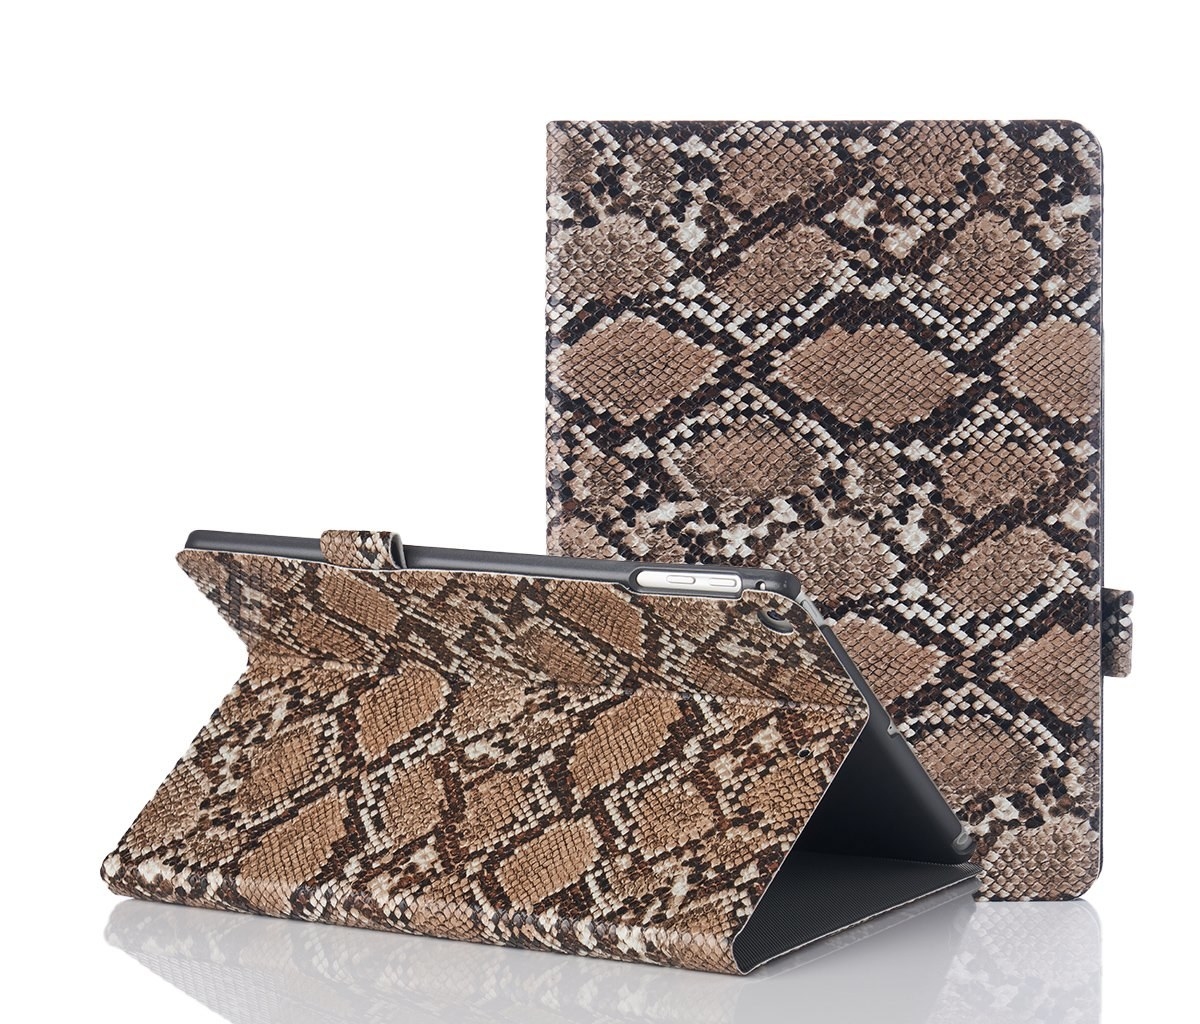 the brown snakeskin case shown closed around an ipad and folded to serve as a stand for a horizontal iPad